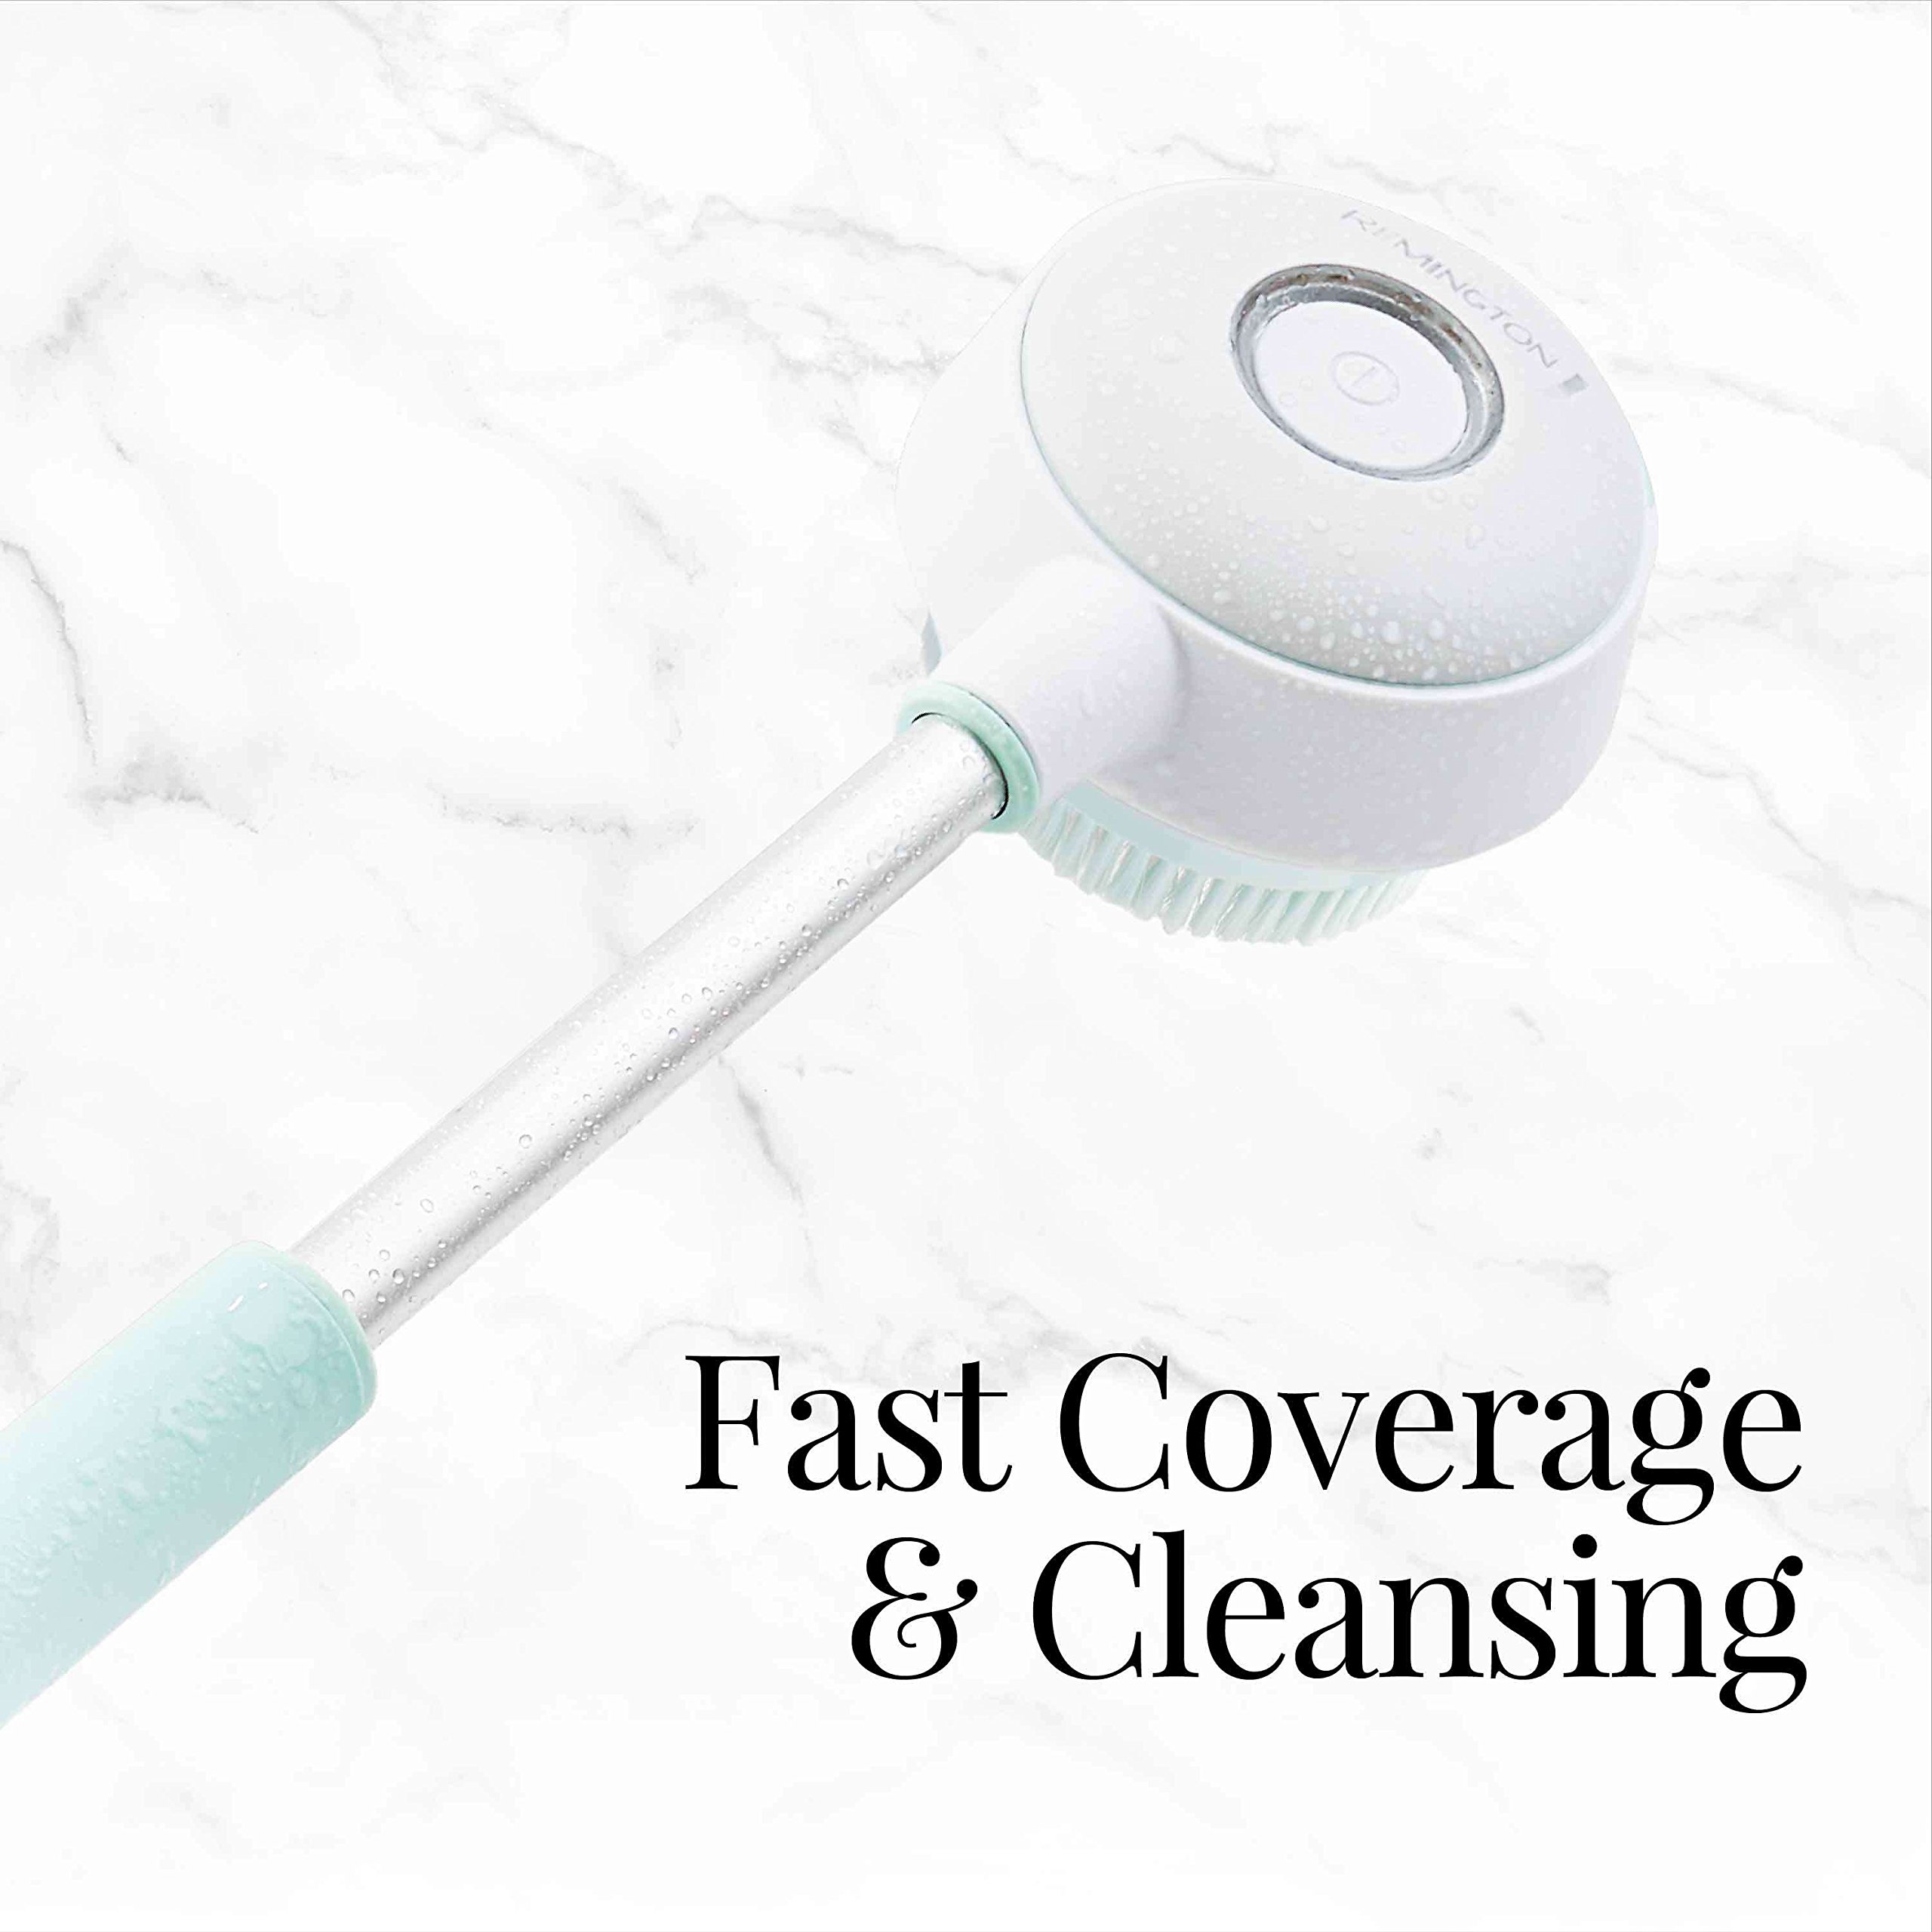 Remington Reveal Rechargeable Rotating Electronic Body Brush with 2 speeds and adjustable handle (BB1000B)